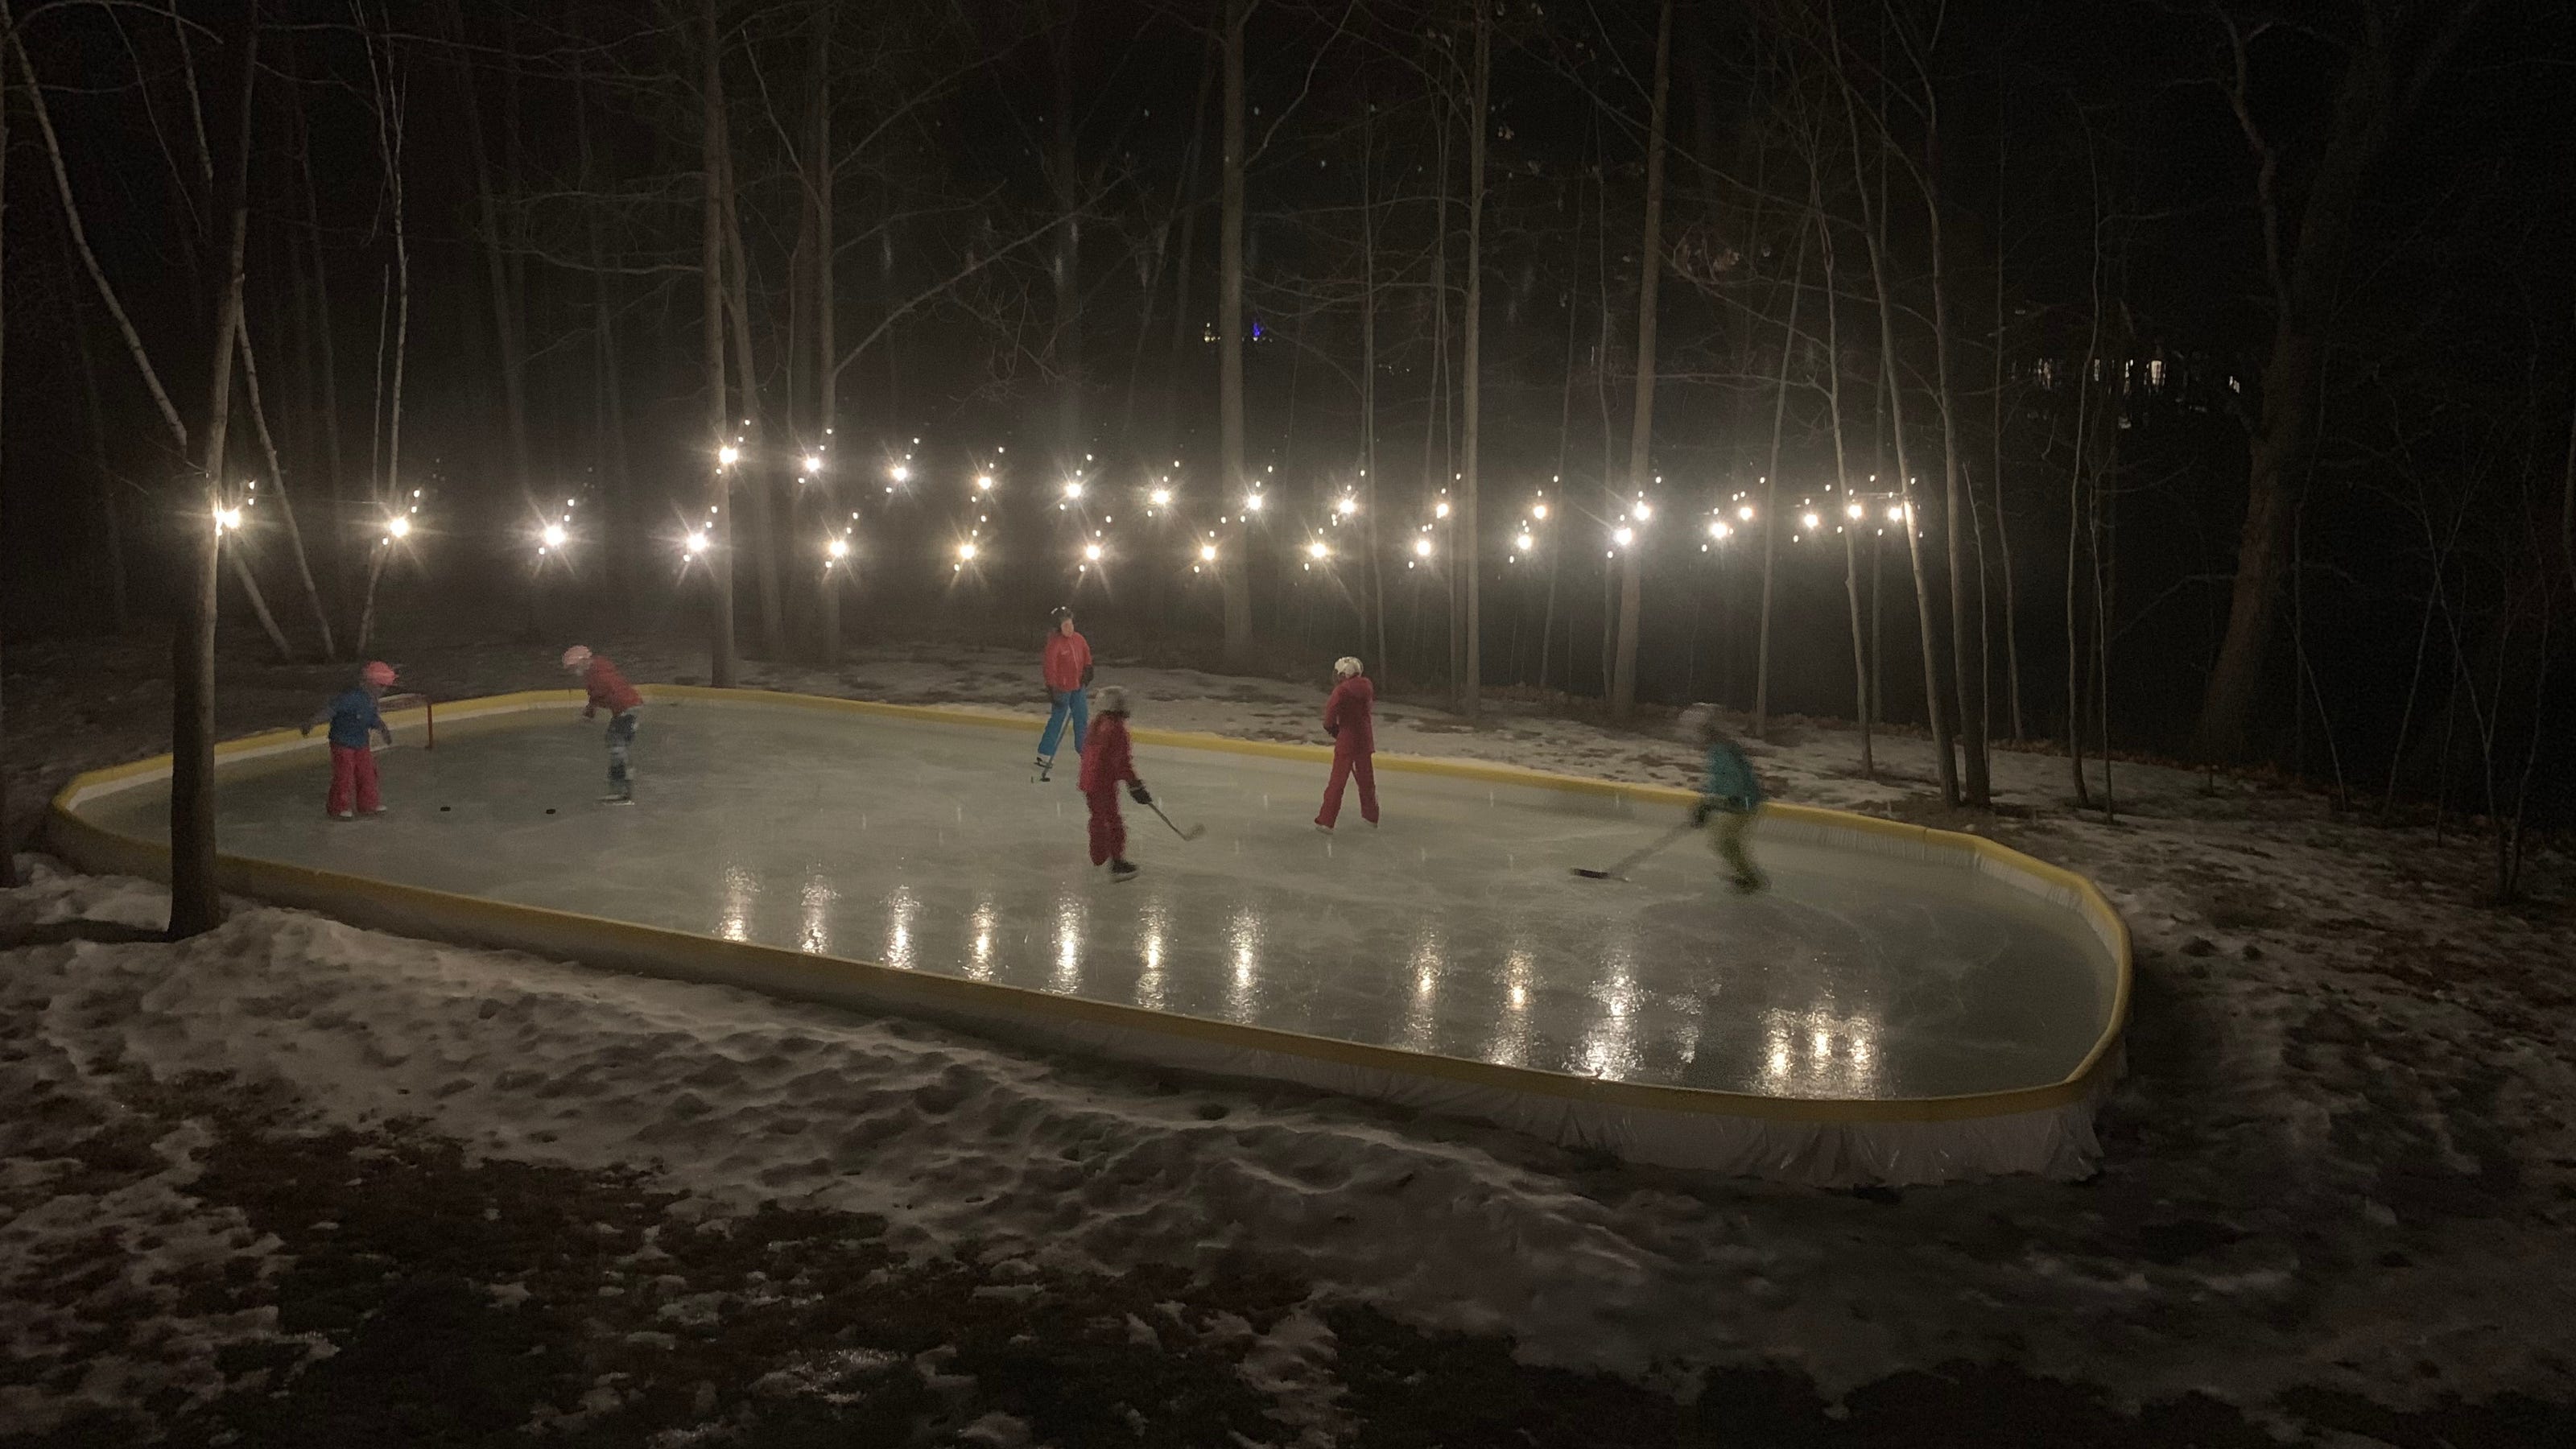 39 HQ Pictures How To Make A Hockey Rink In Backyard : Kwikrink Synthetic Ice The Original Synthetic Ice Makers